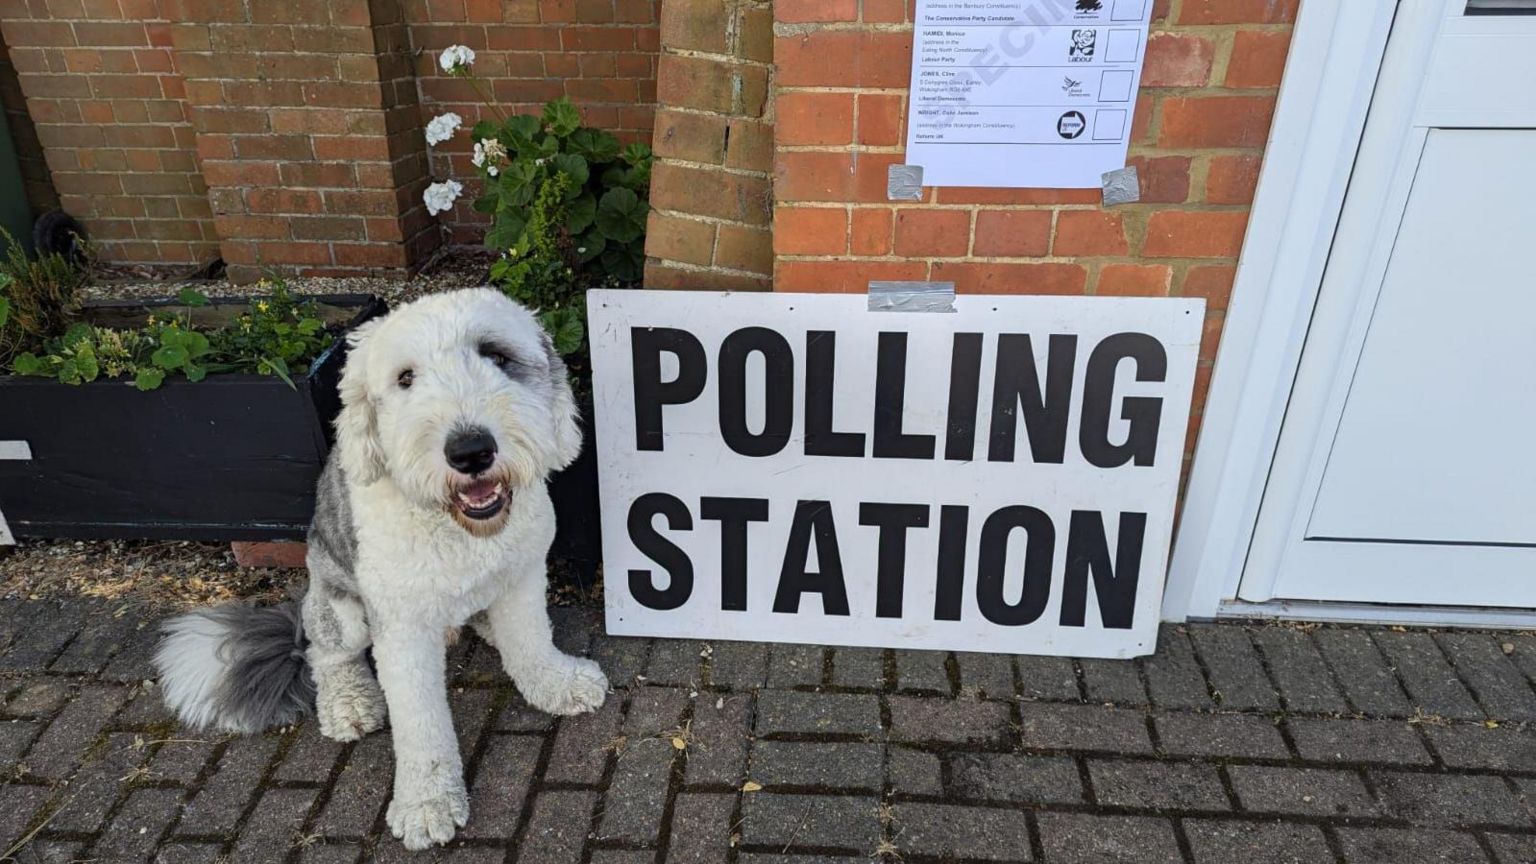 Maui the old English sheepdog outside a polling station in Wokinghgam, Berkshire. The white and grey dog is sat next to a white sign with black writing which says "polling station".